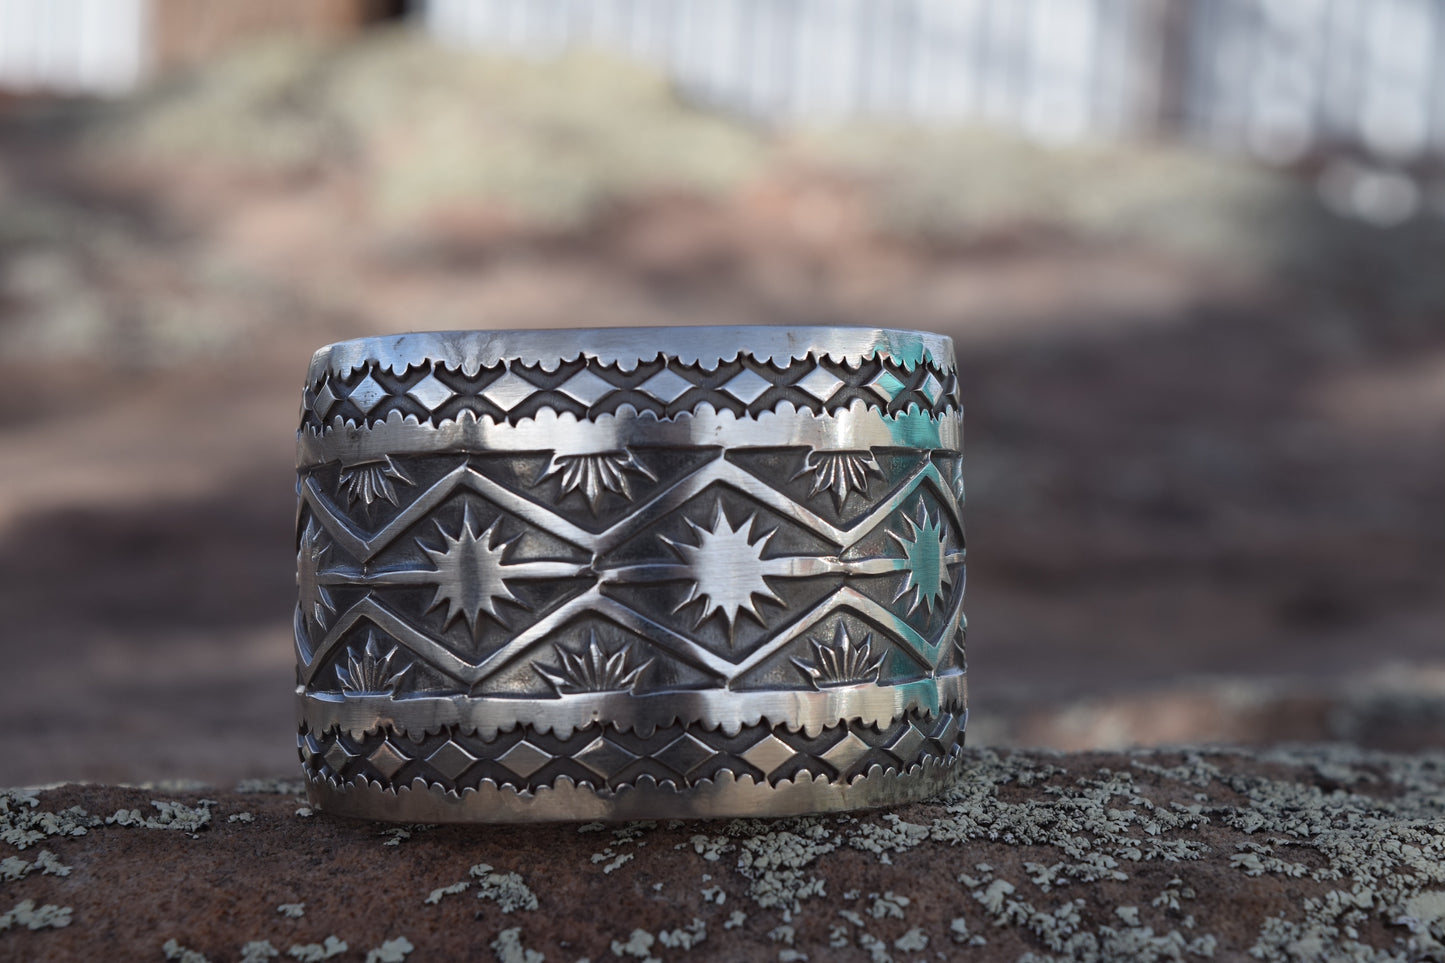 FIREWORK STAMPED CUFF FROM THE RODGERS COLLECTION